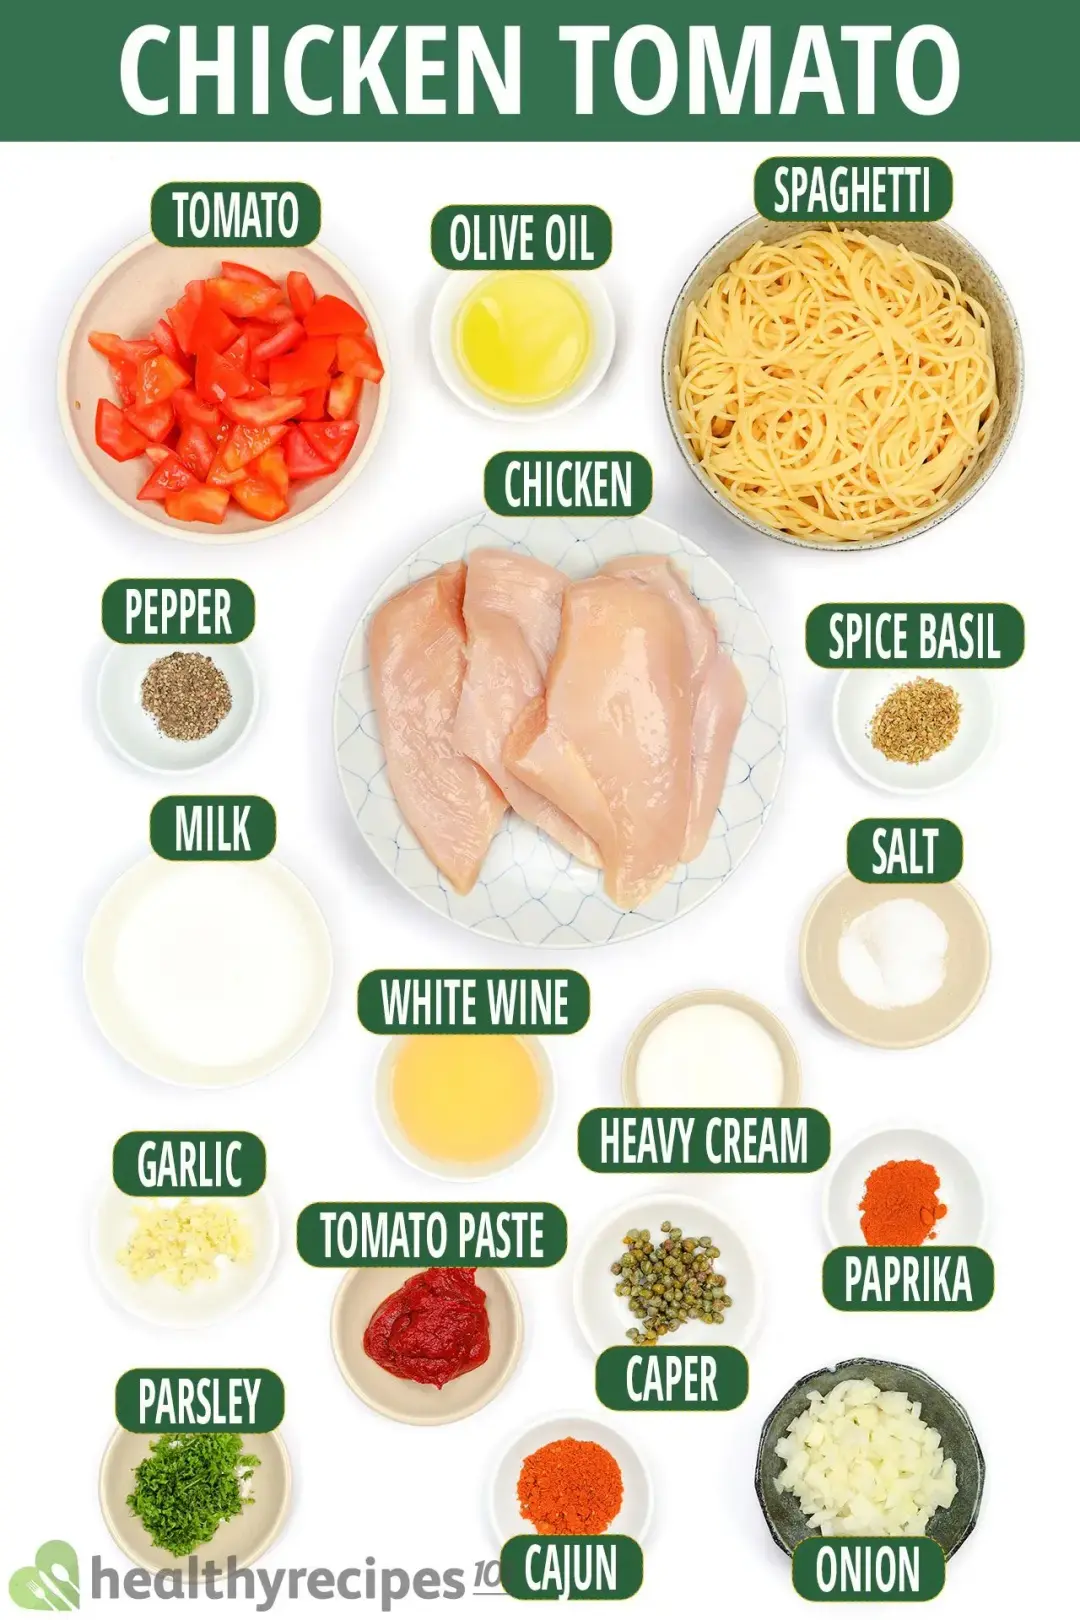 Ingredients for Chicken Tomato